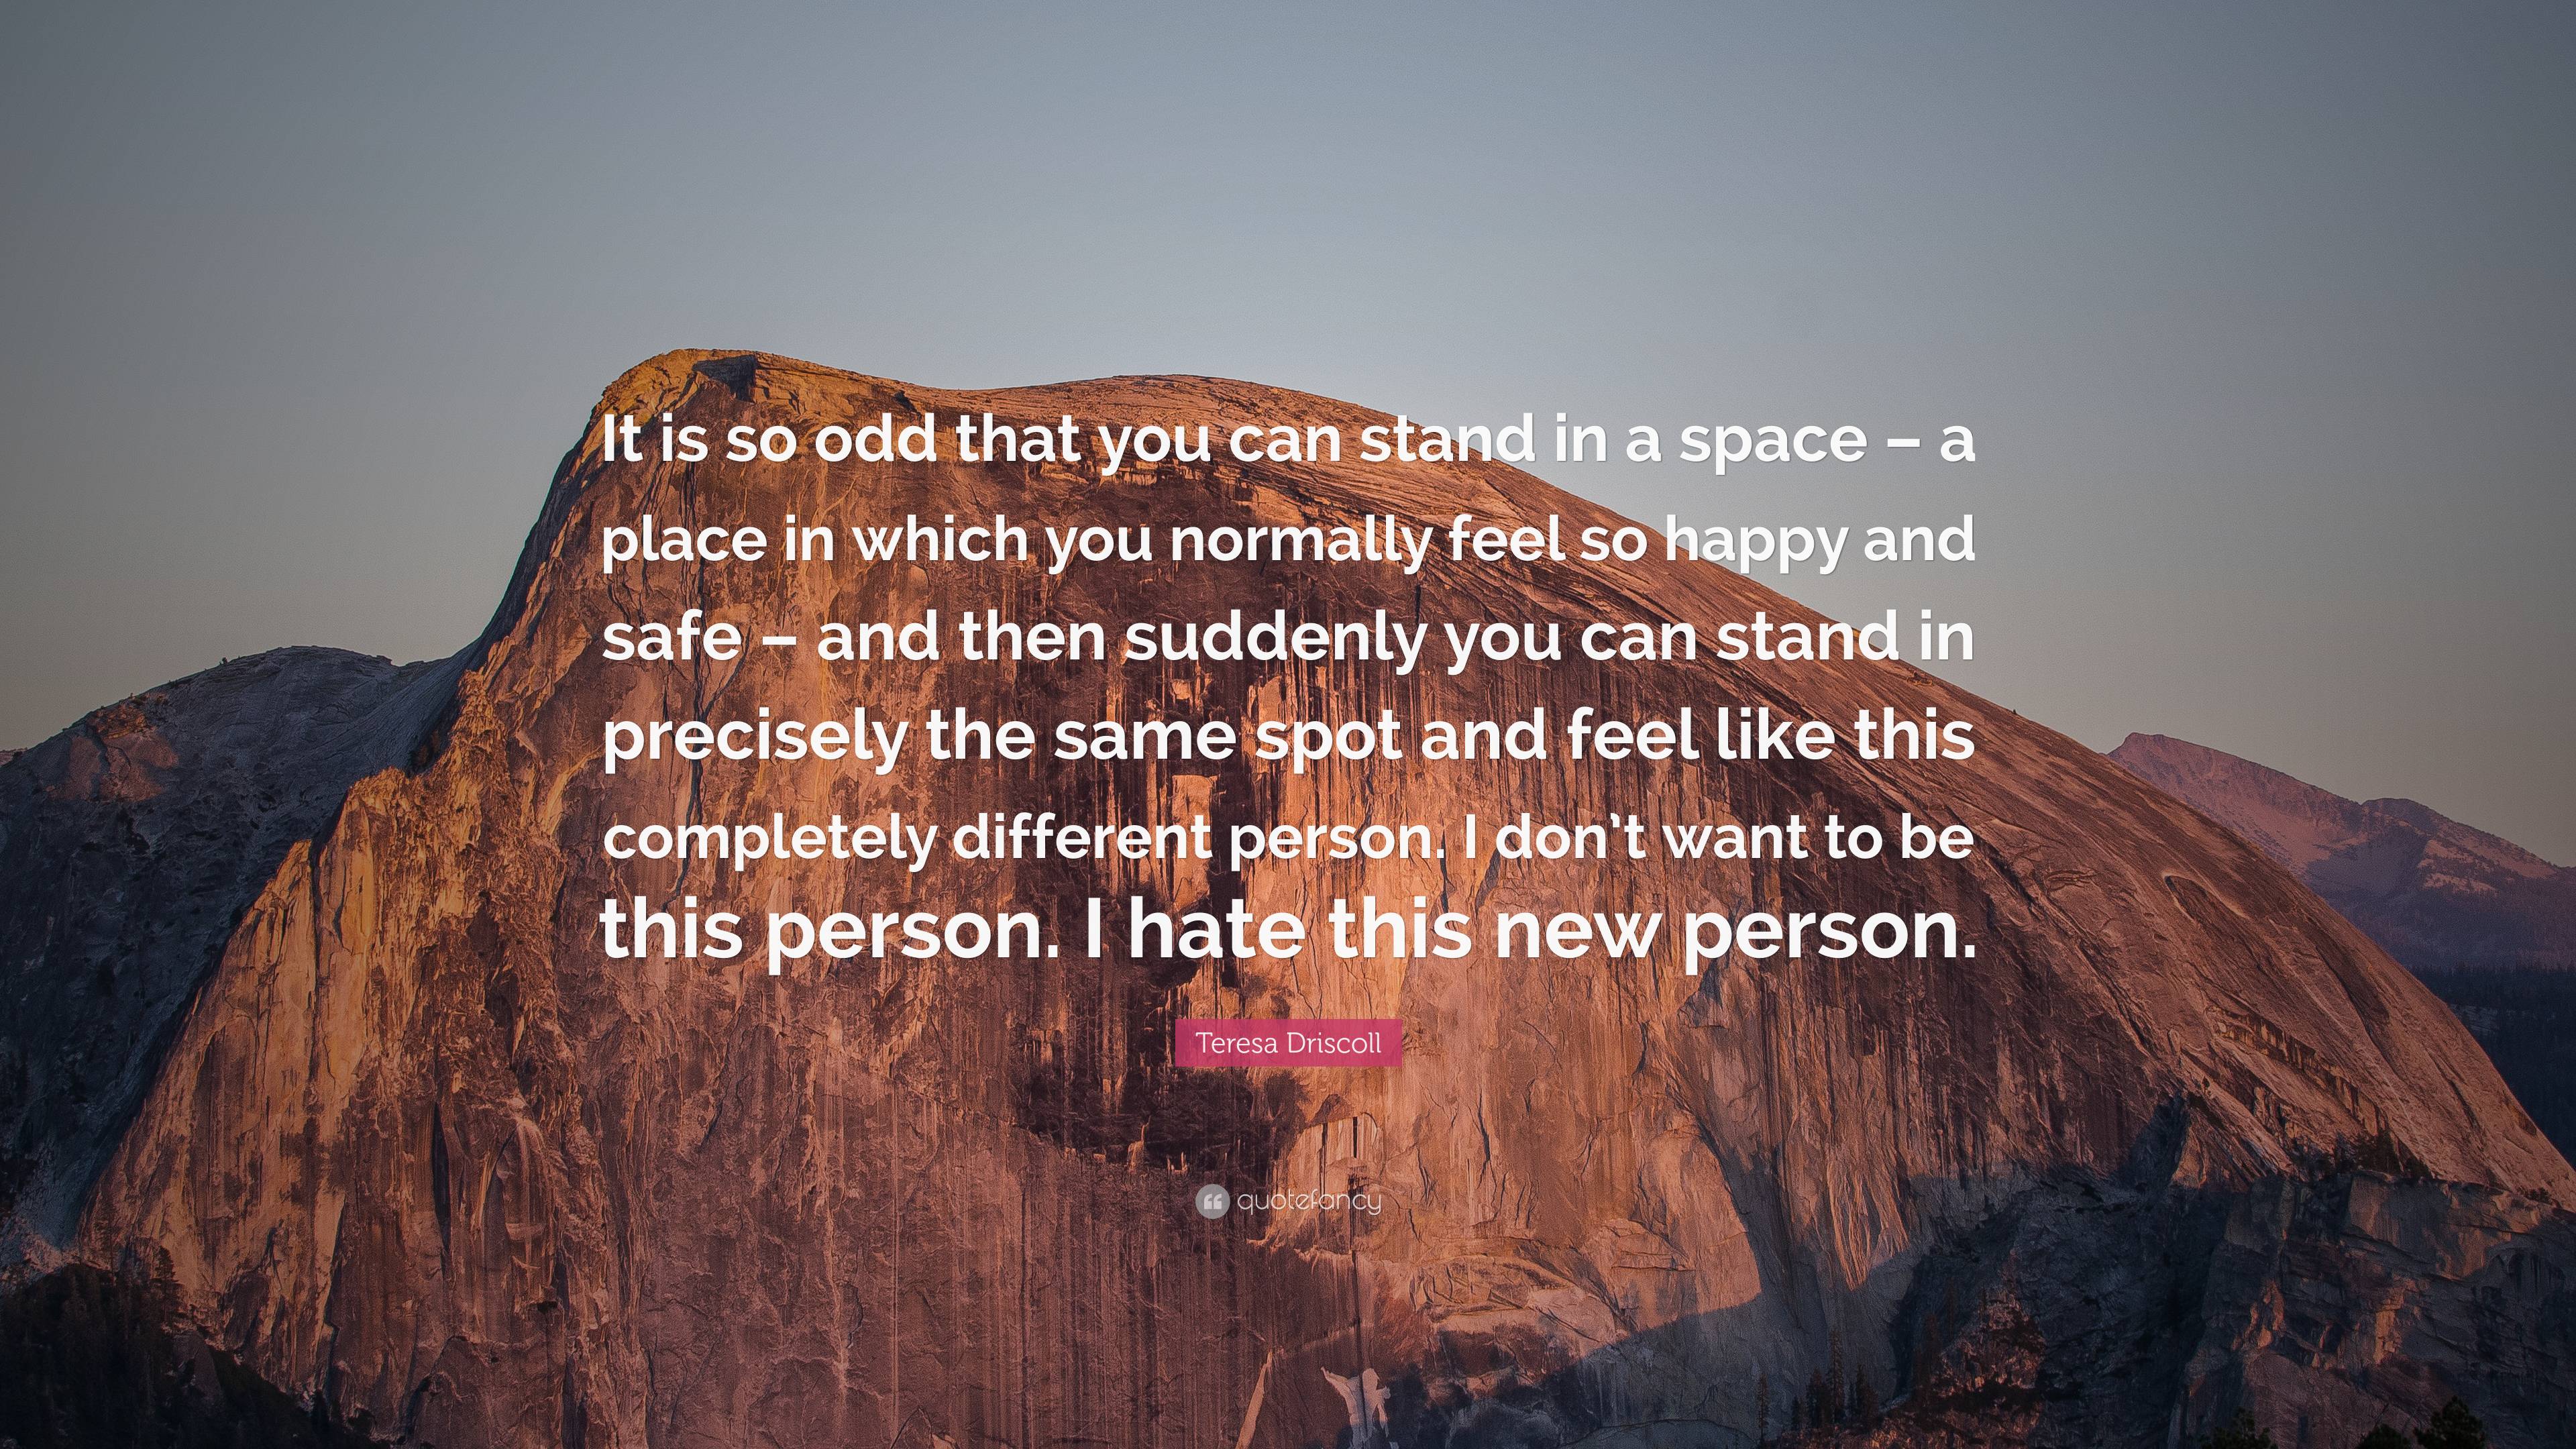 Teresa Driscoll Quote: “It is so odd that you can stand in a space – a  place in which you normally feel so happy and safe – and then suddenly  yo...”